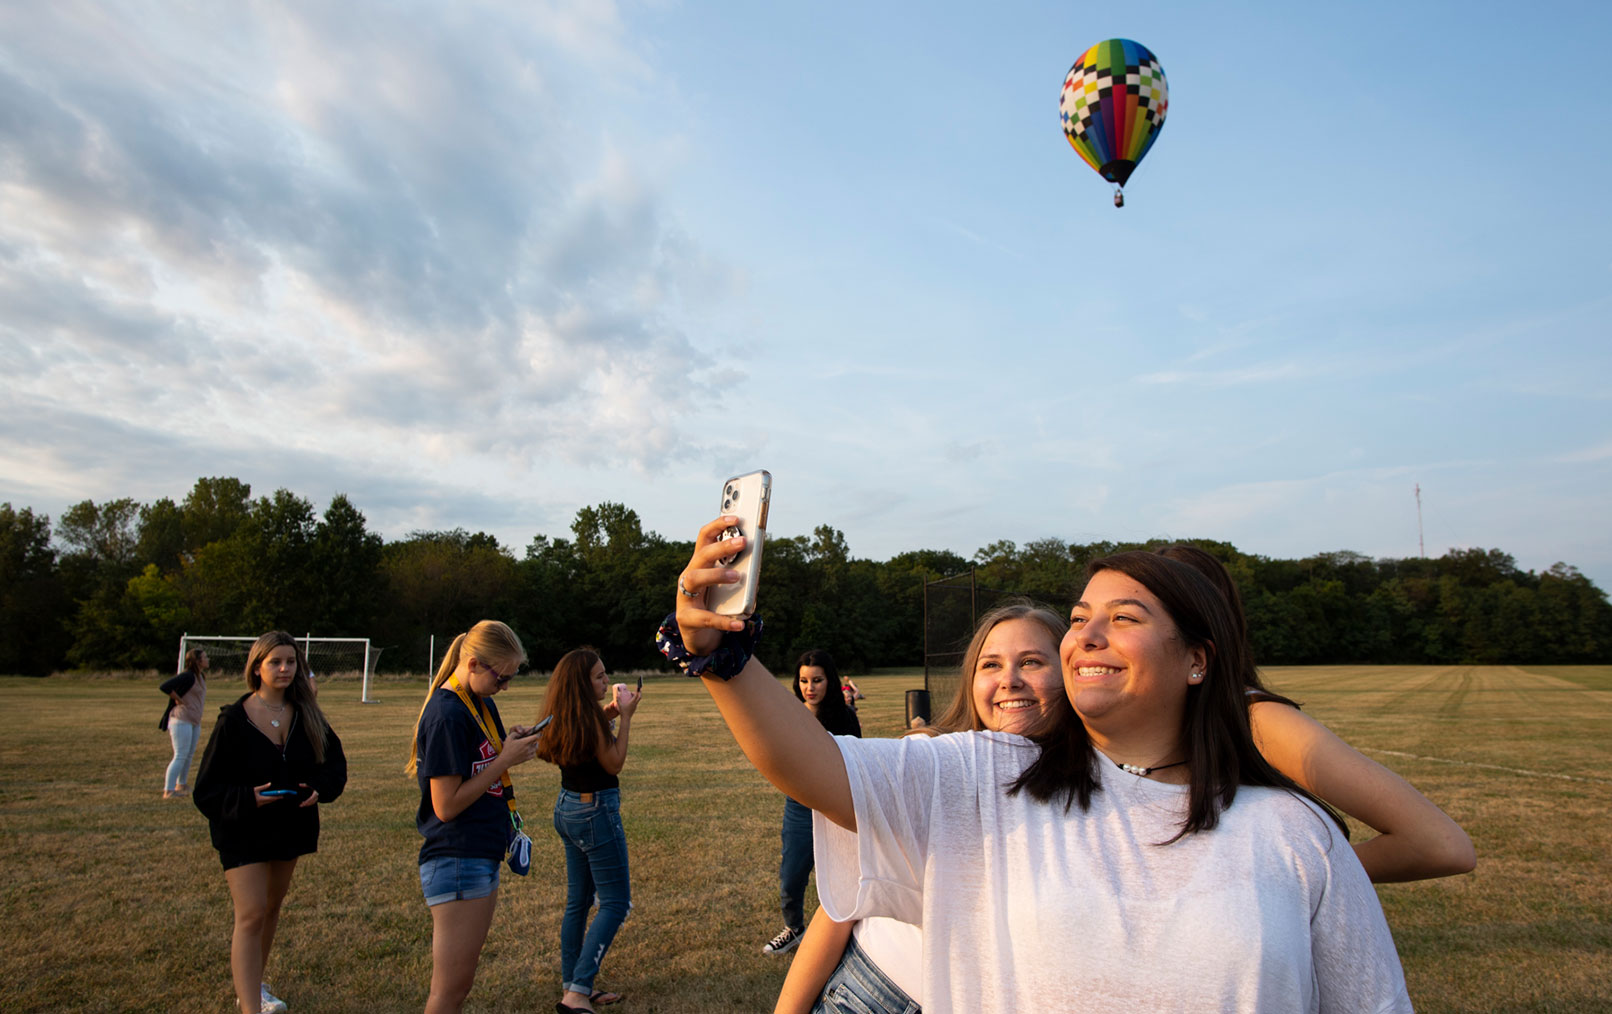 college students taking photos in a field with a hot air balloon in the sky